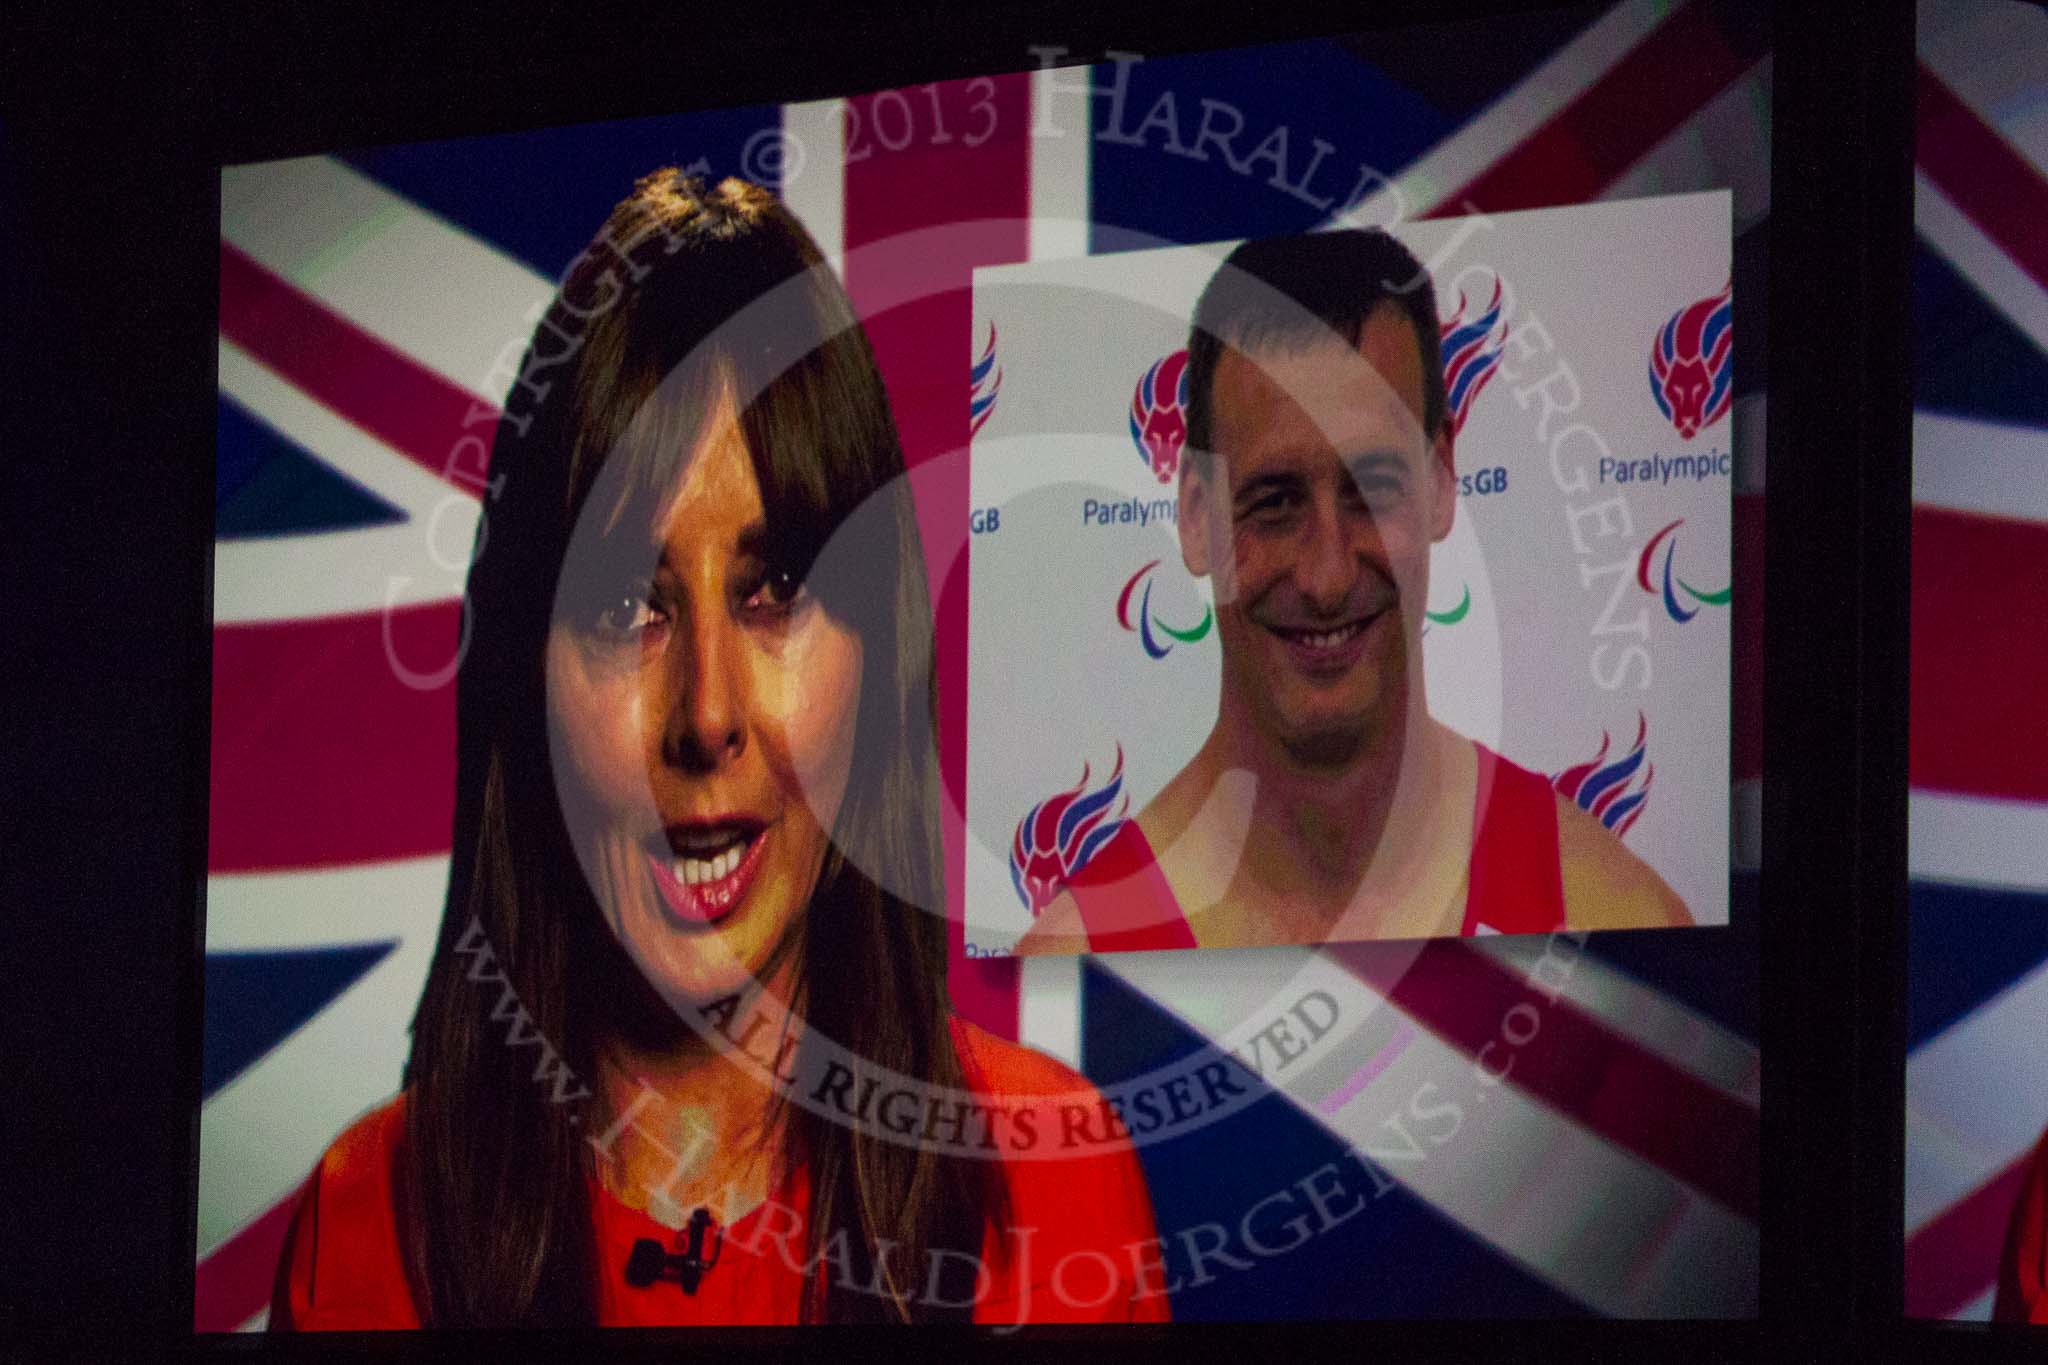 British Military Tournament 2013.
Earls Court,
London SW5,

United Kingdom,
on 06 December 2013 at 16:40, image #466